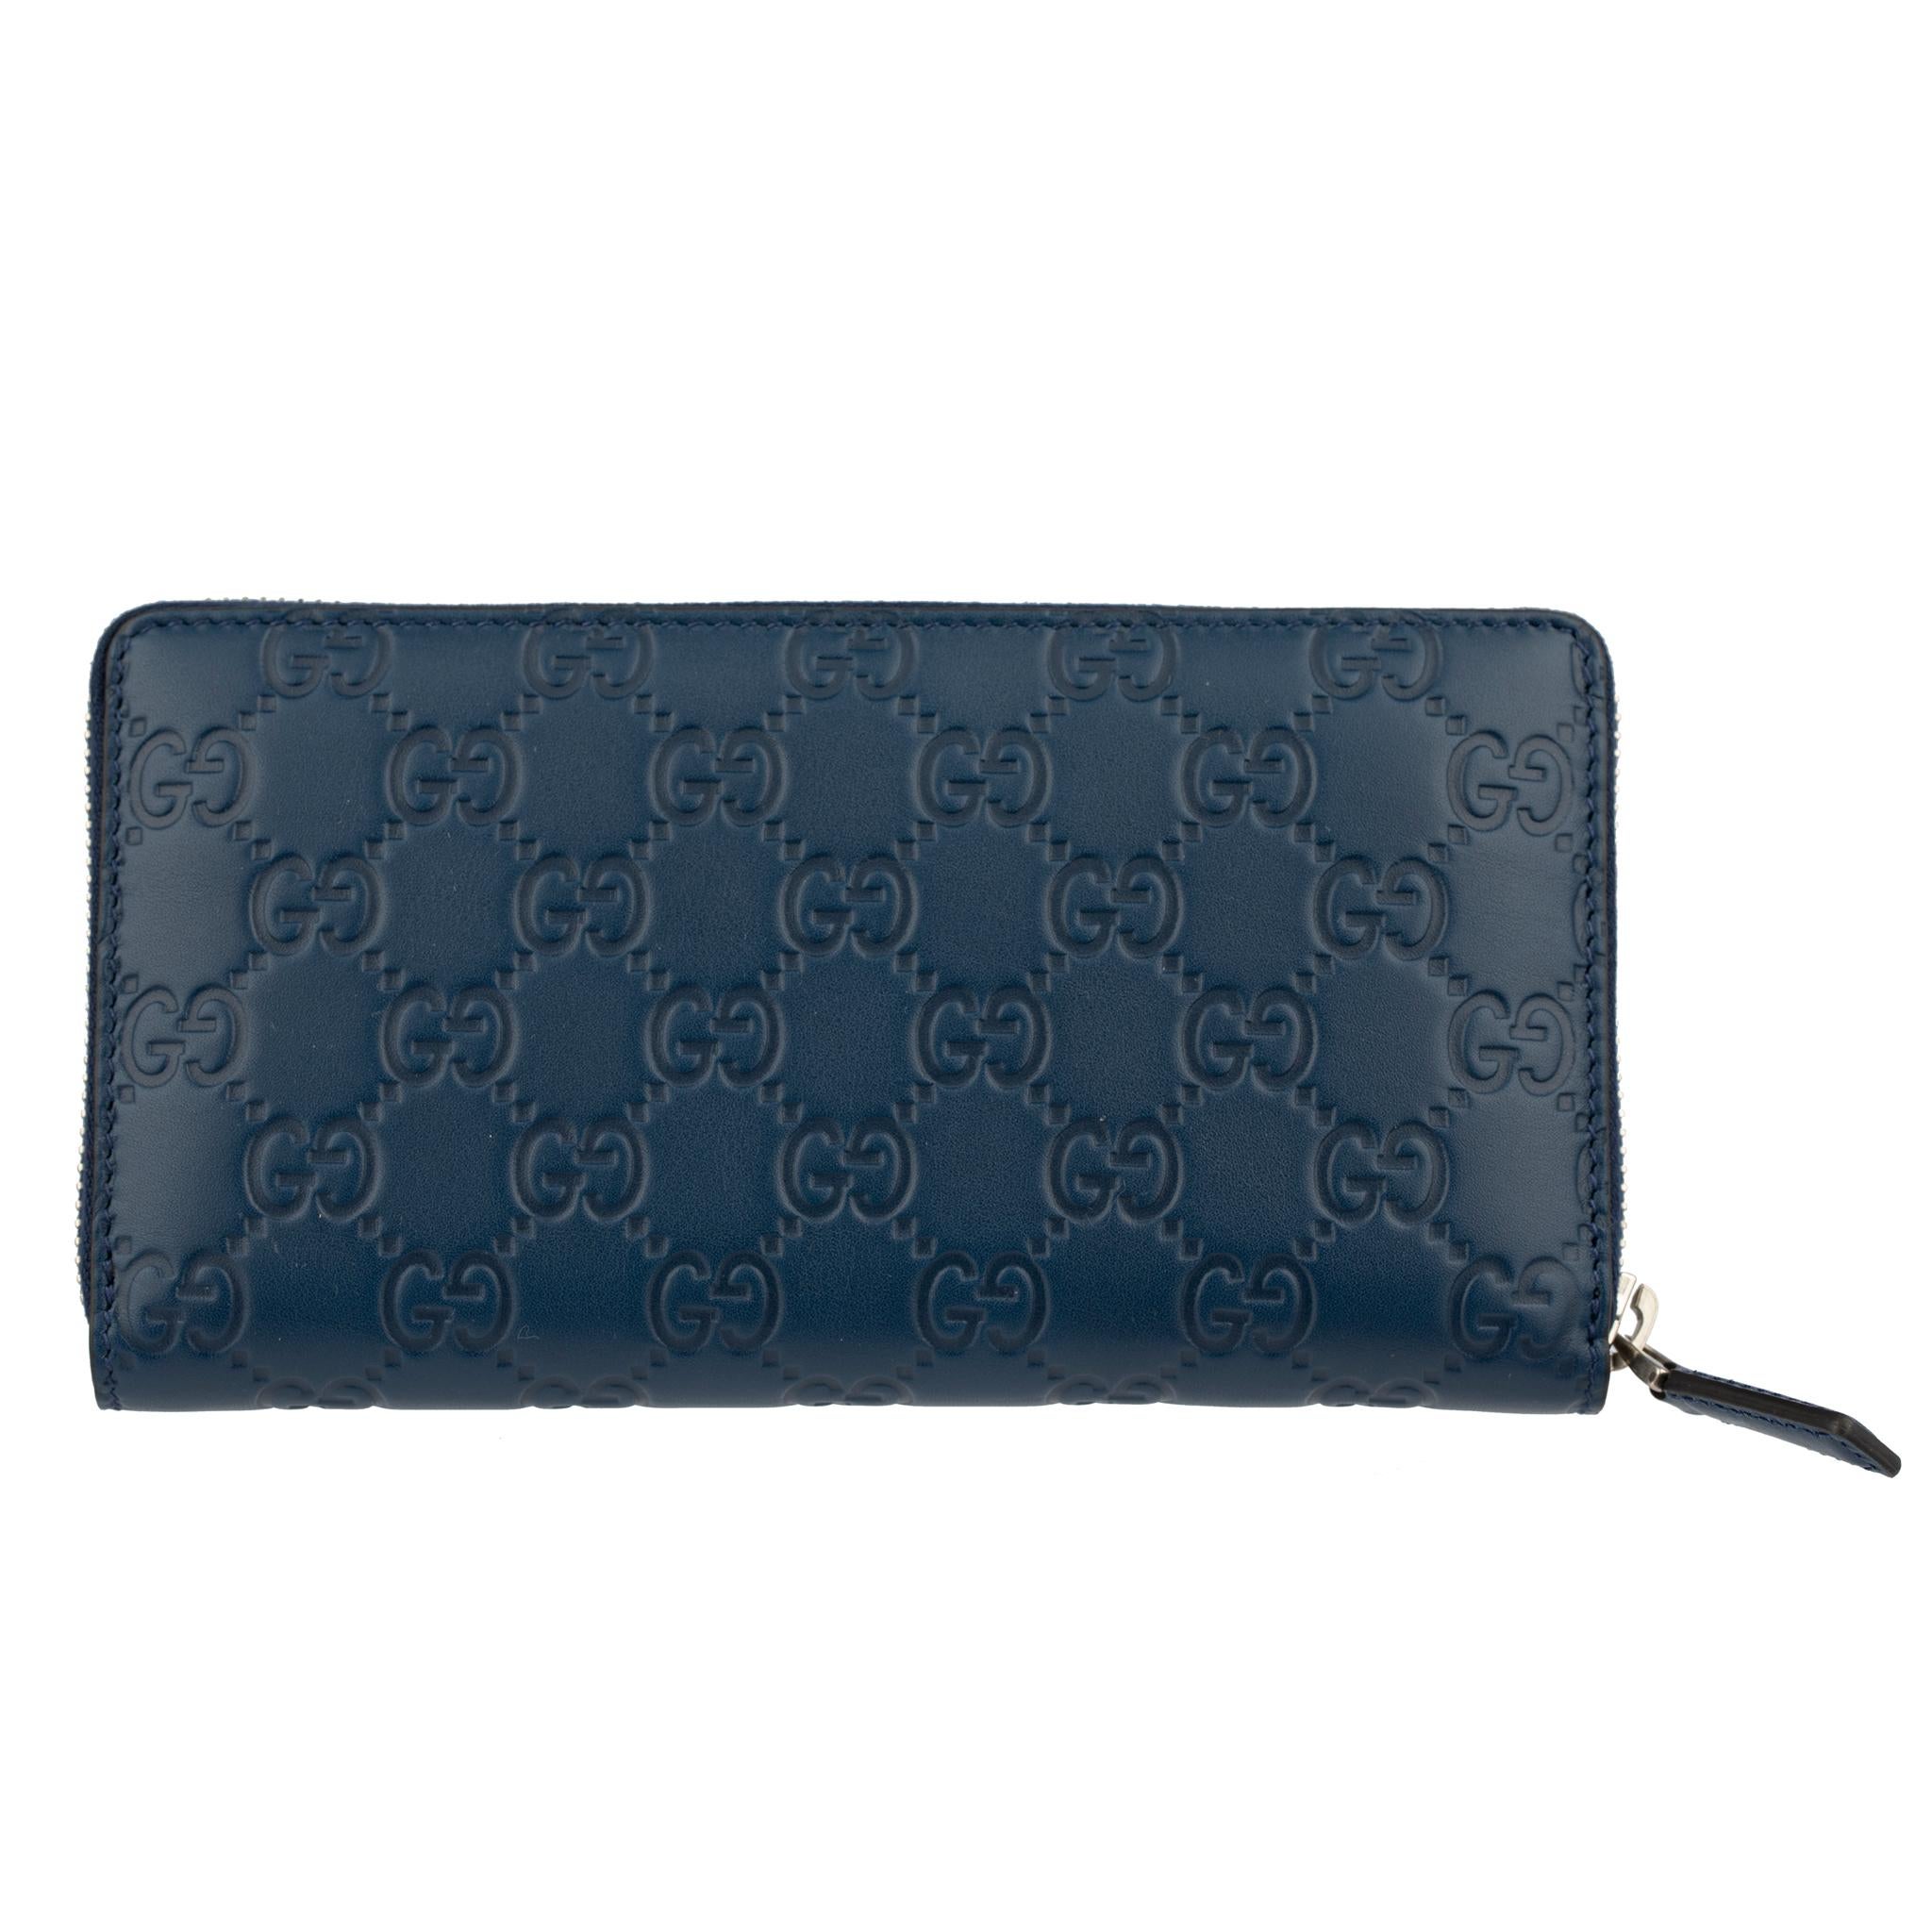 Gucci GG Wallet Navy Leather 